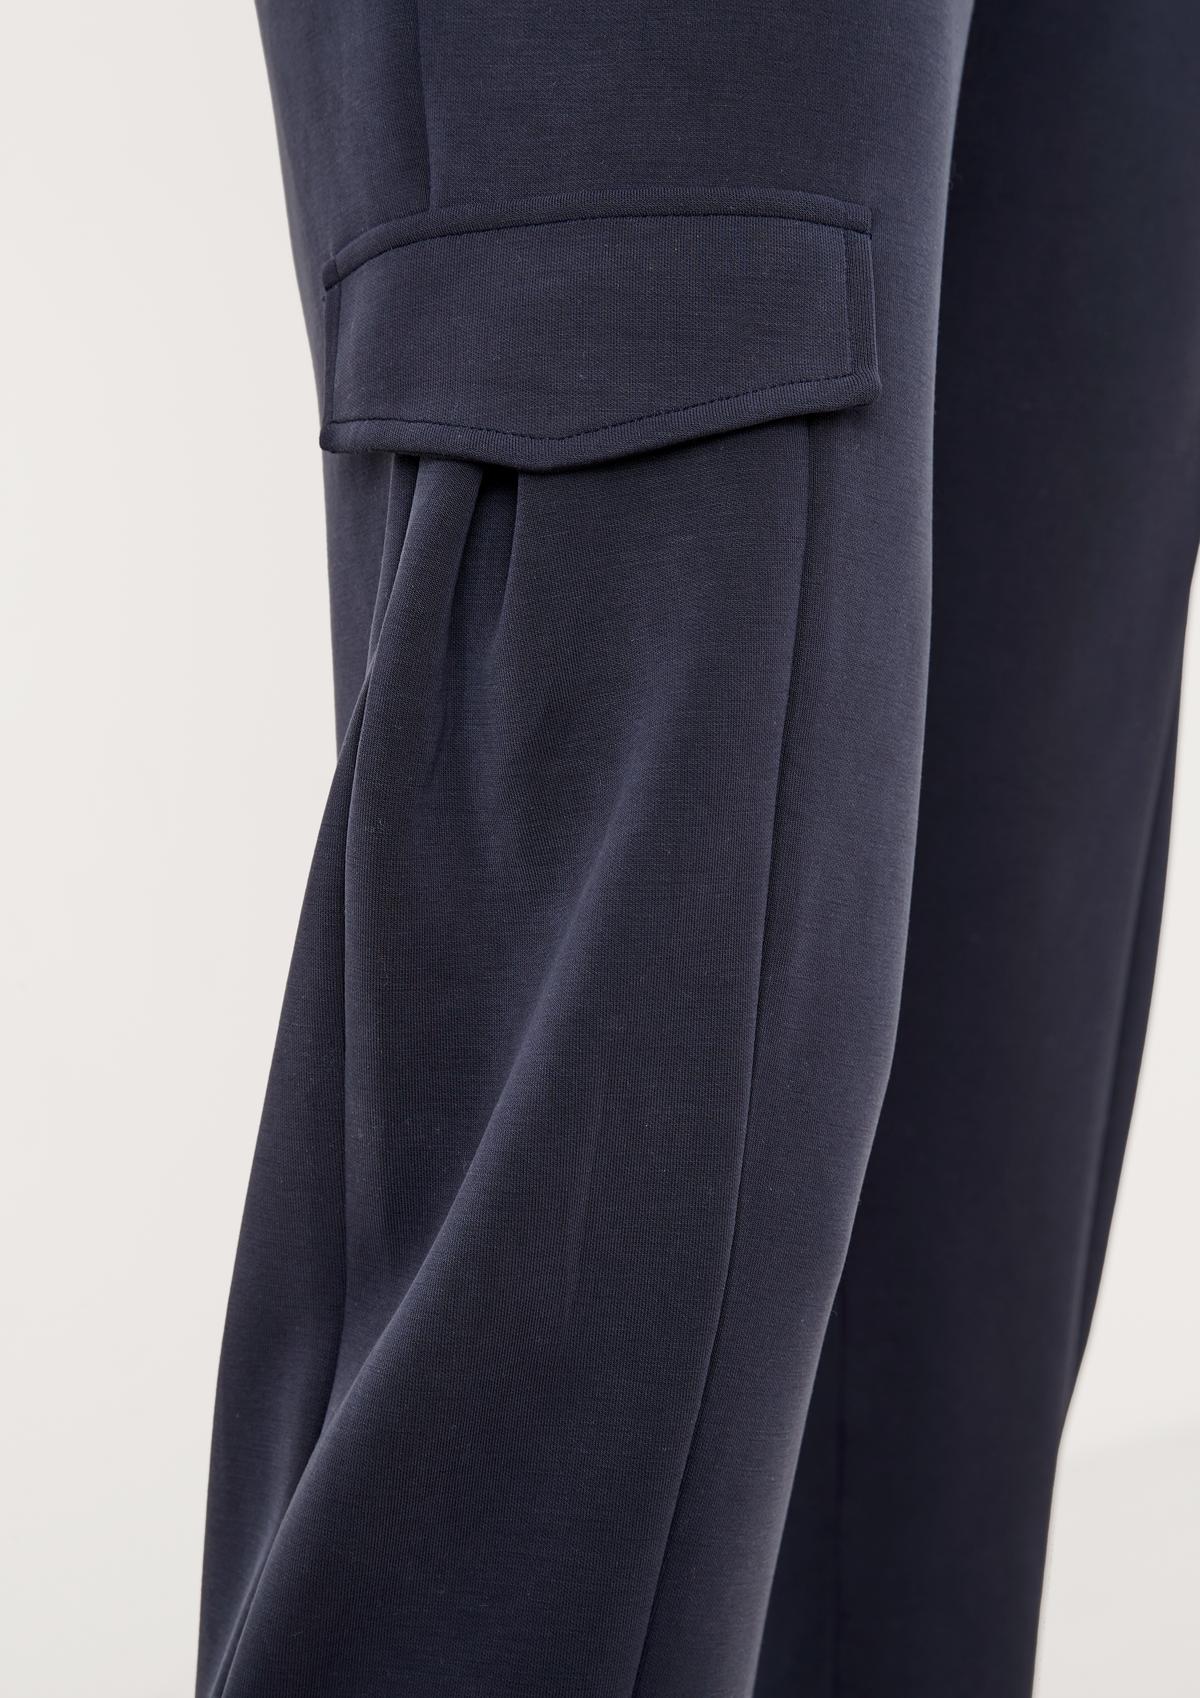 s.Oliver Scuba trousers in a cargo style